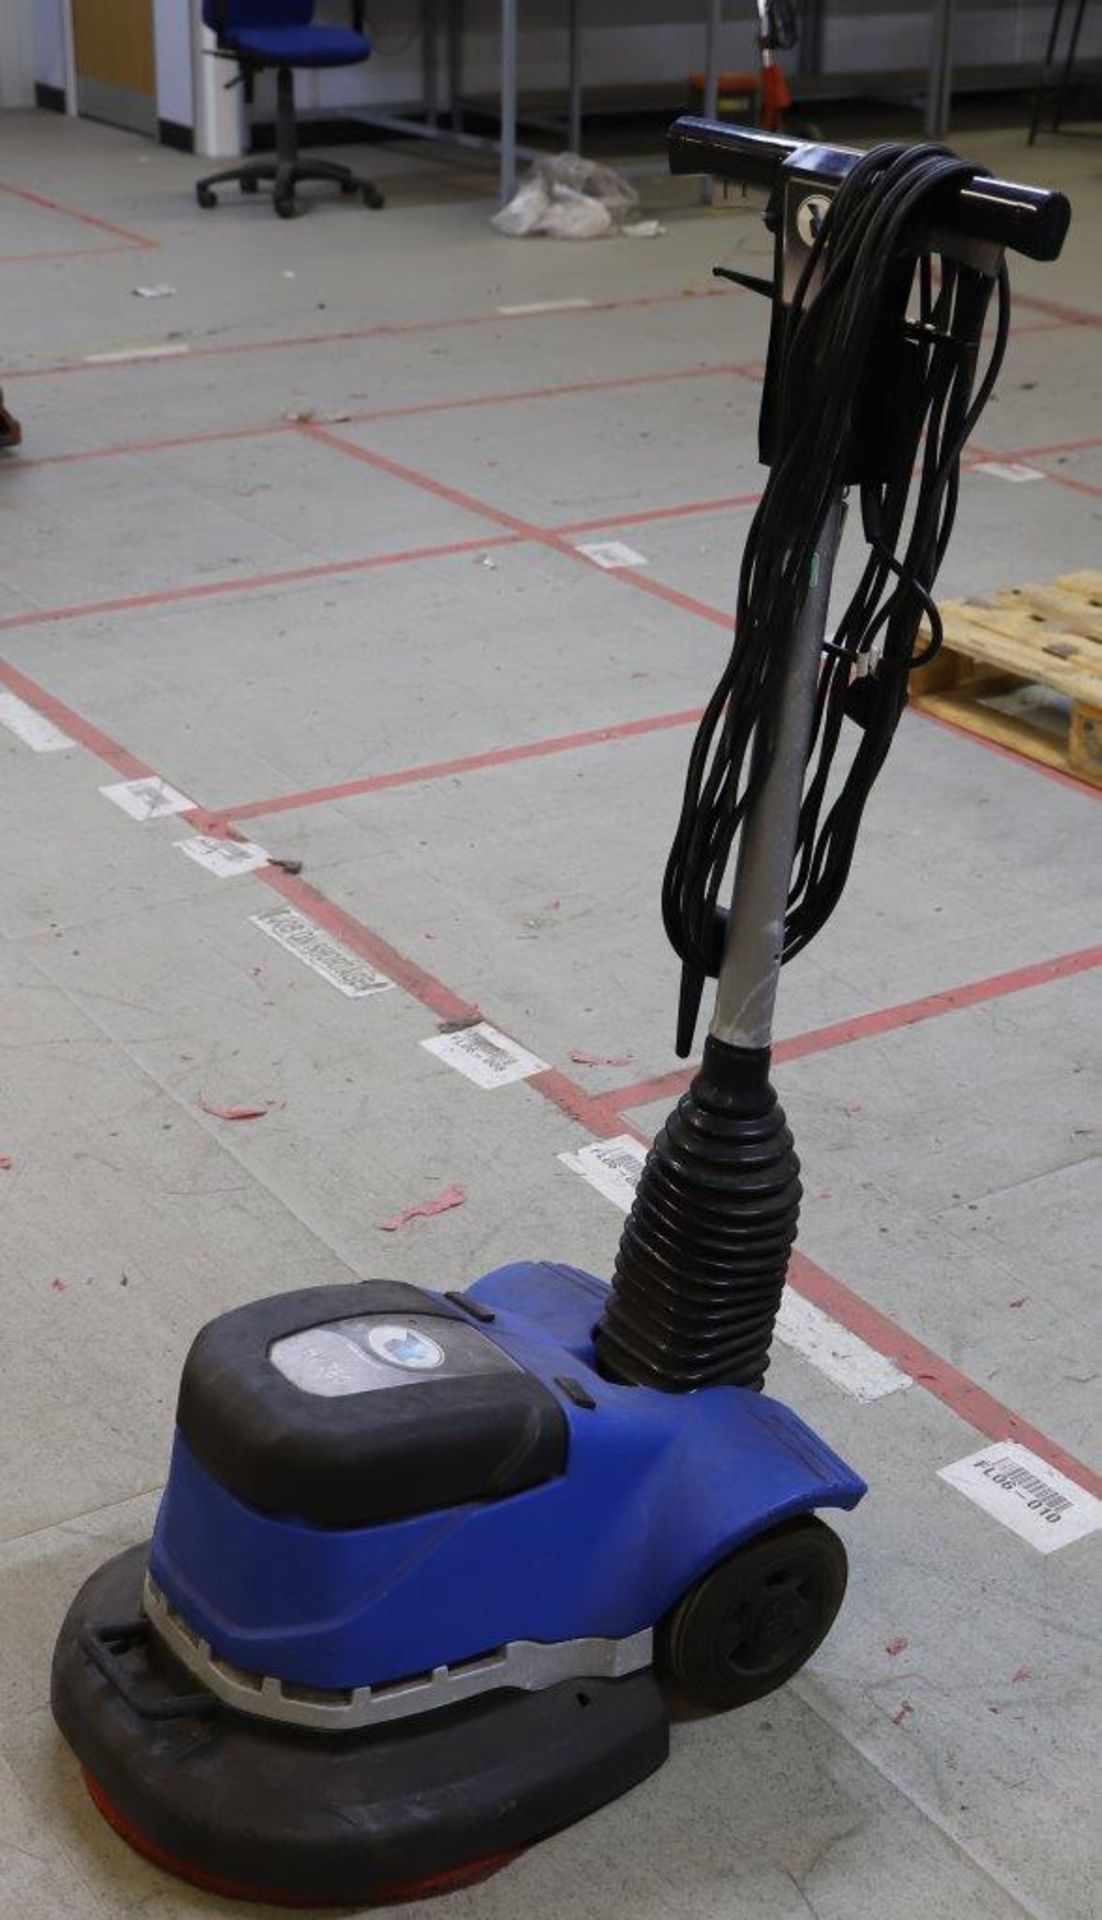 Premiere HV380 Rotary Floor Cleaning Machine for Hard Floors & Carpet Care